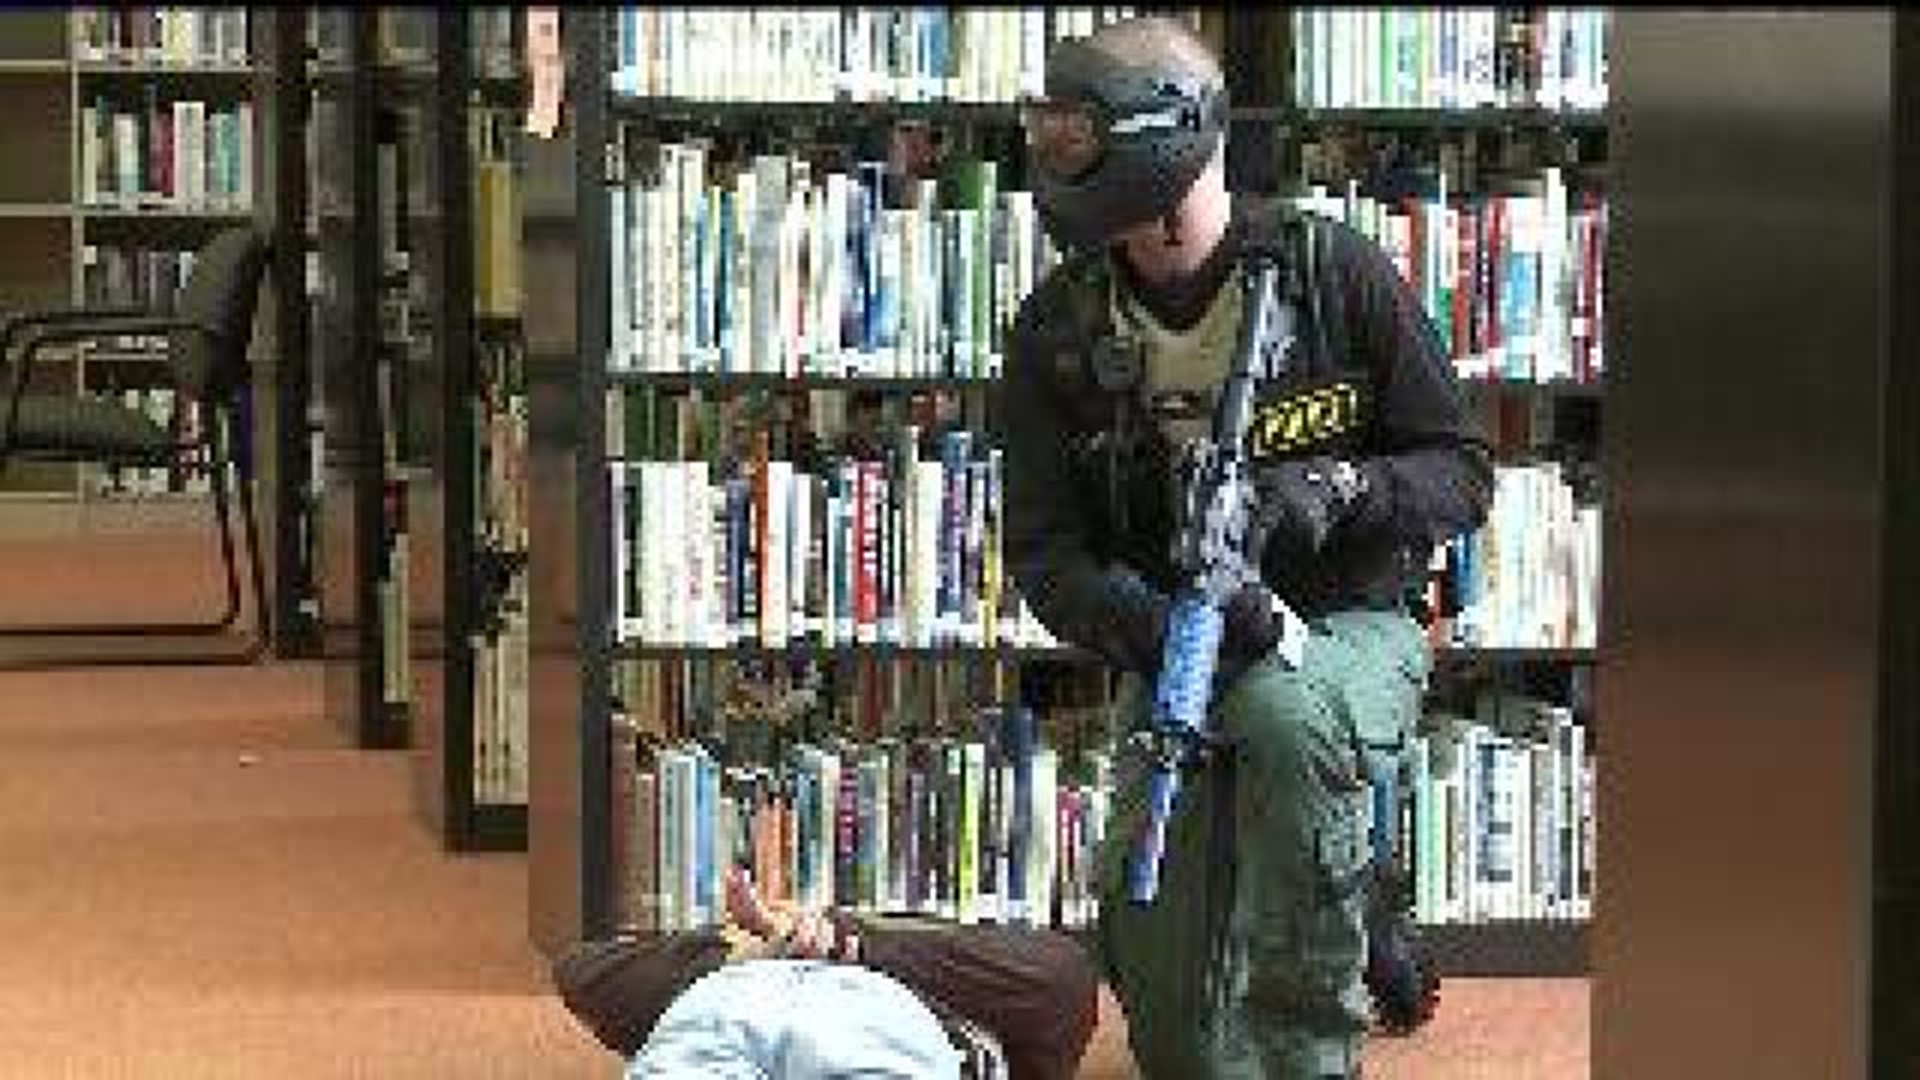 Police train for active shooter